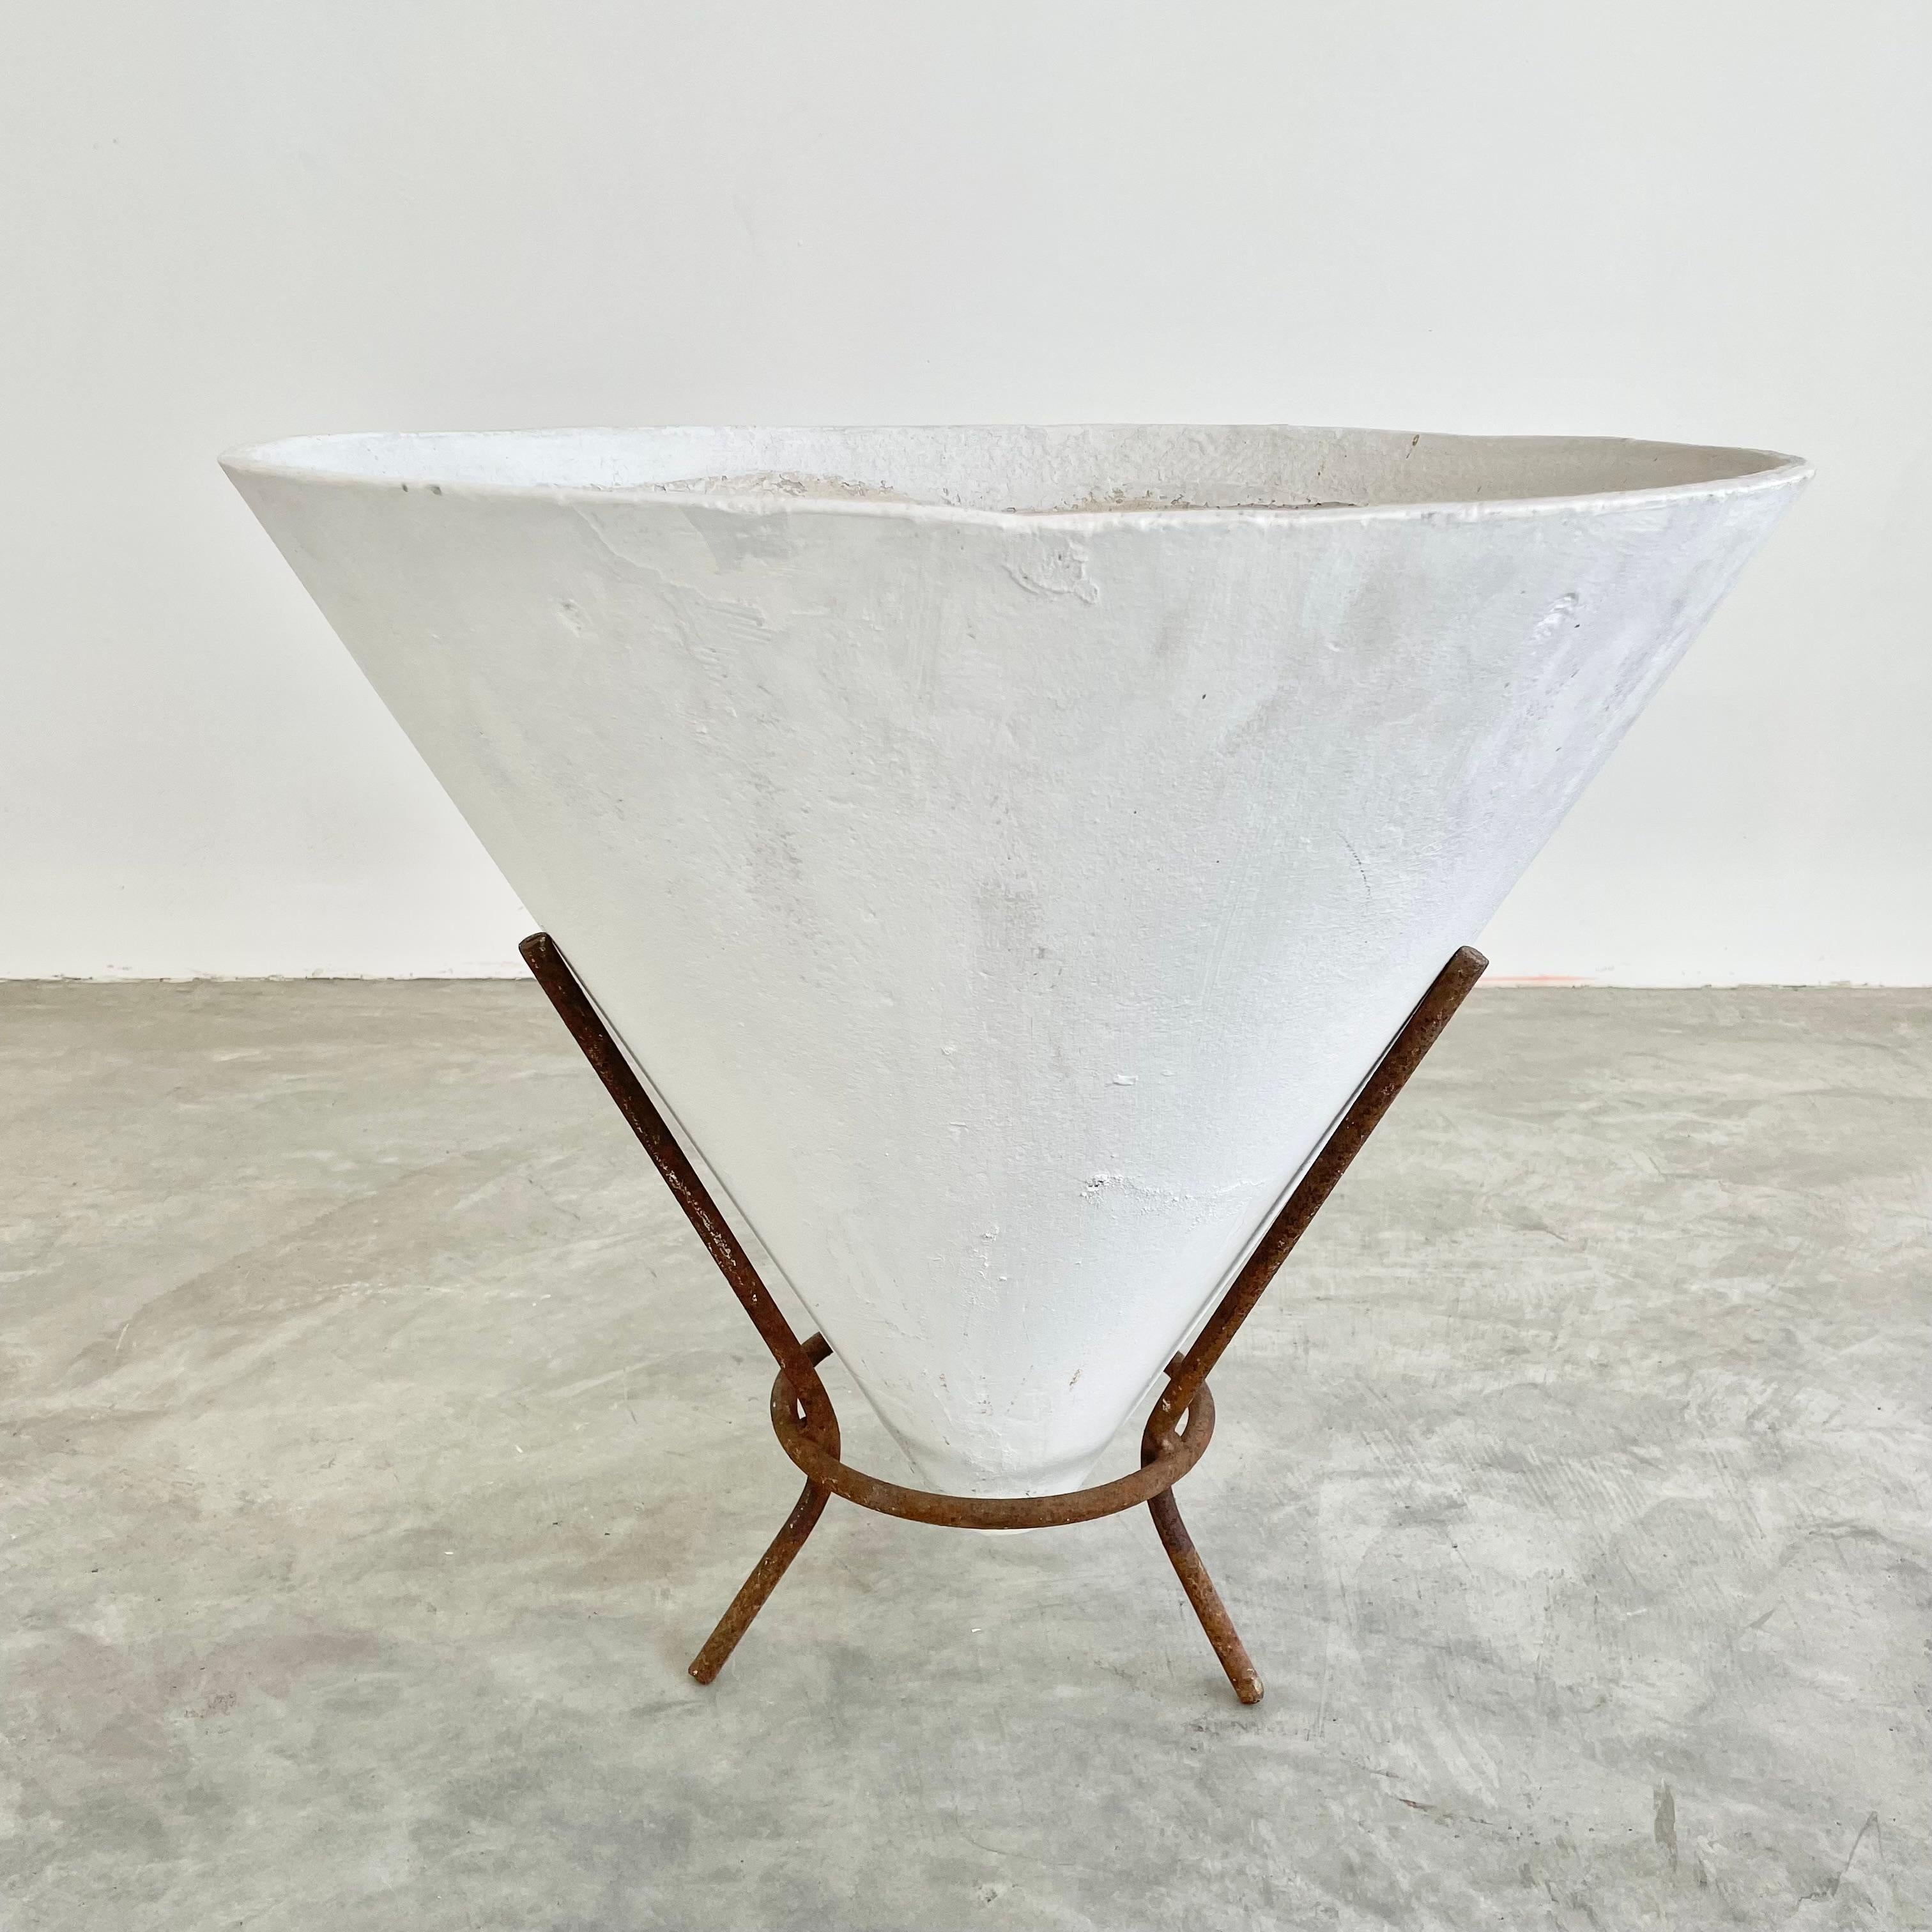 Swiss Willy Guhl Concrete Cone Planter on Iron Stand, 1960s Switzerland For Sale